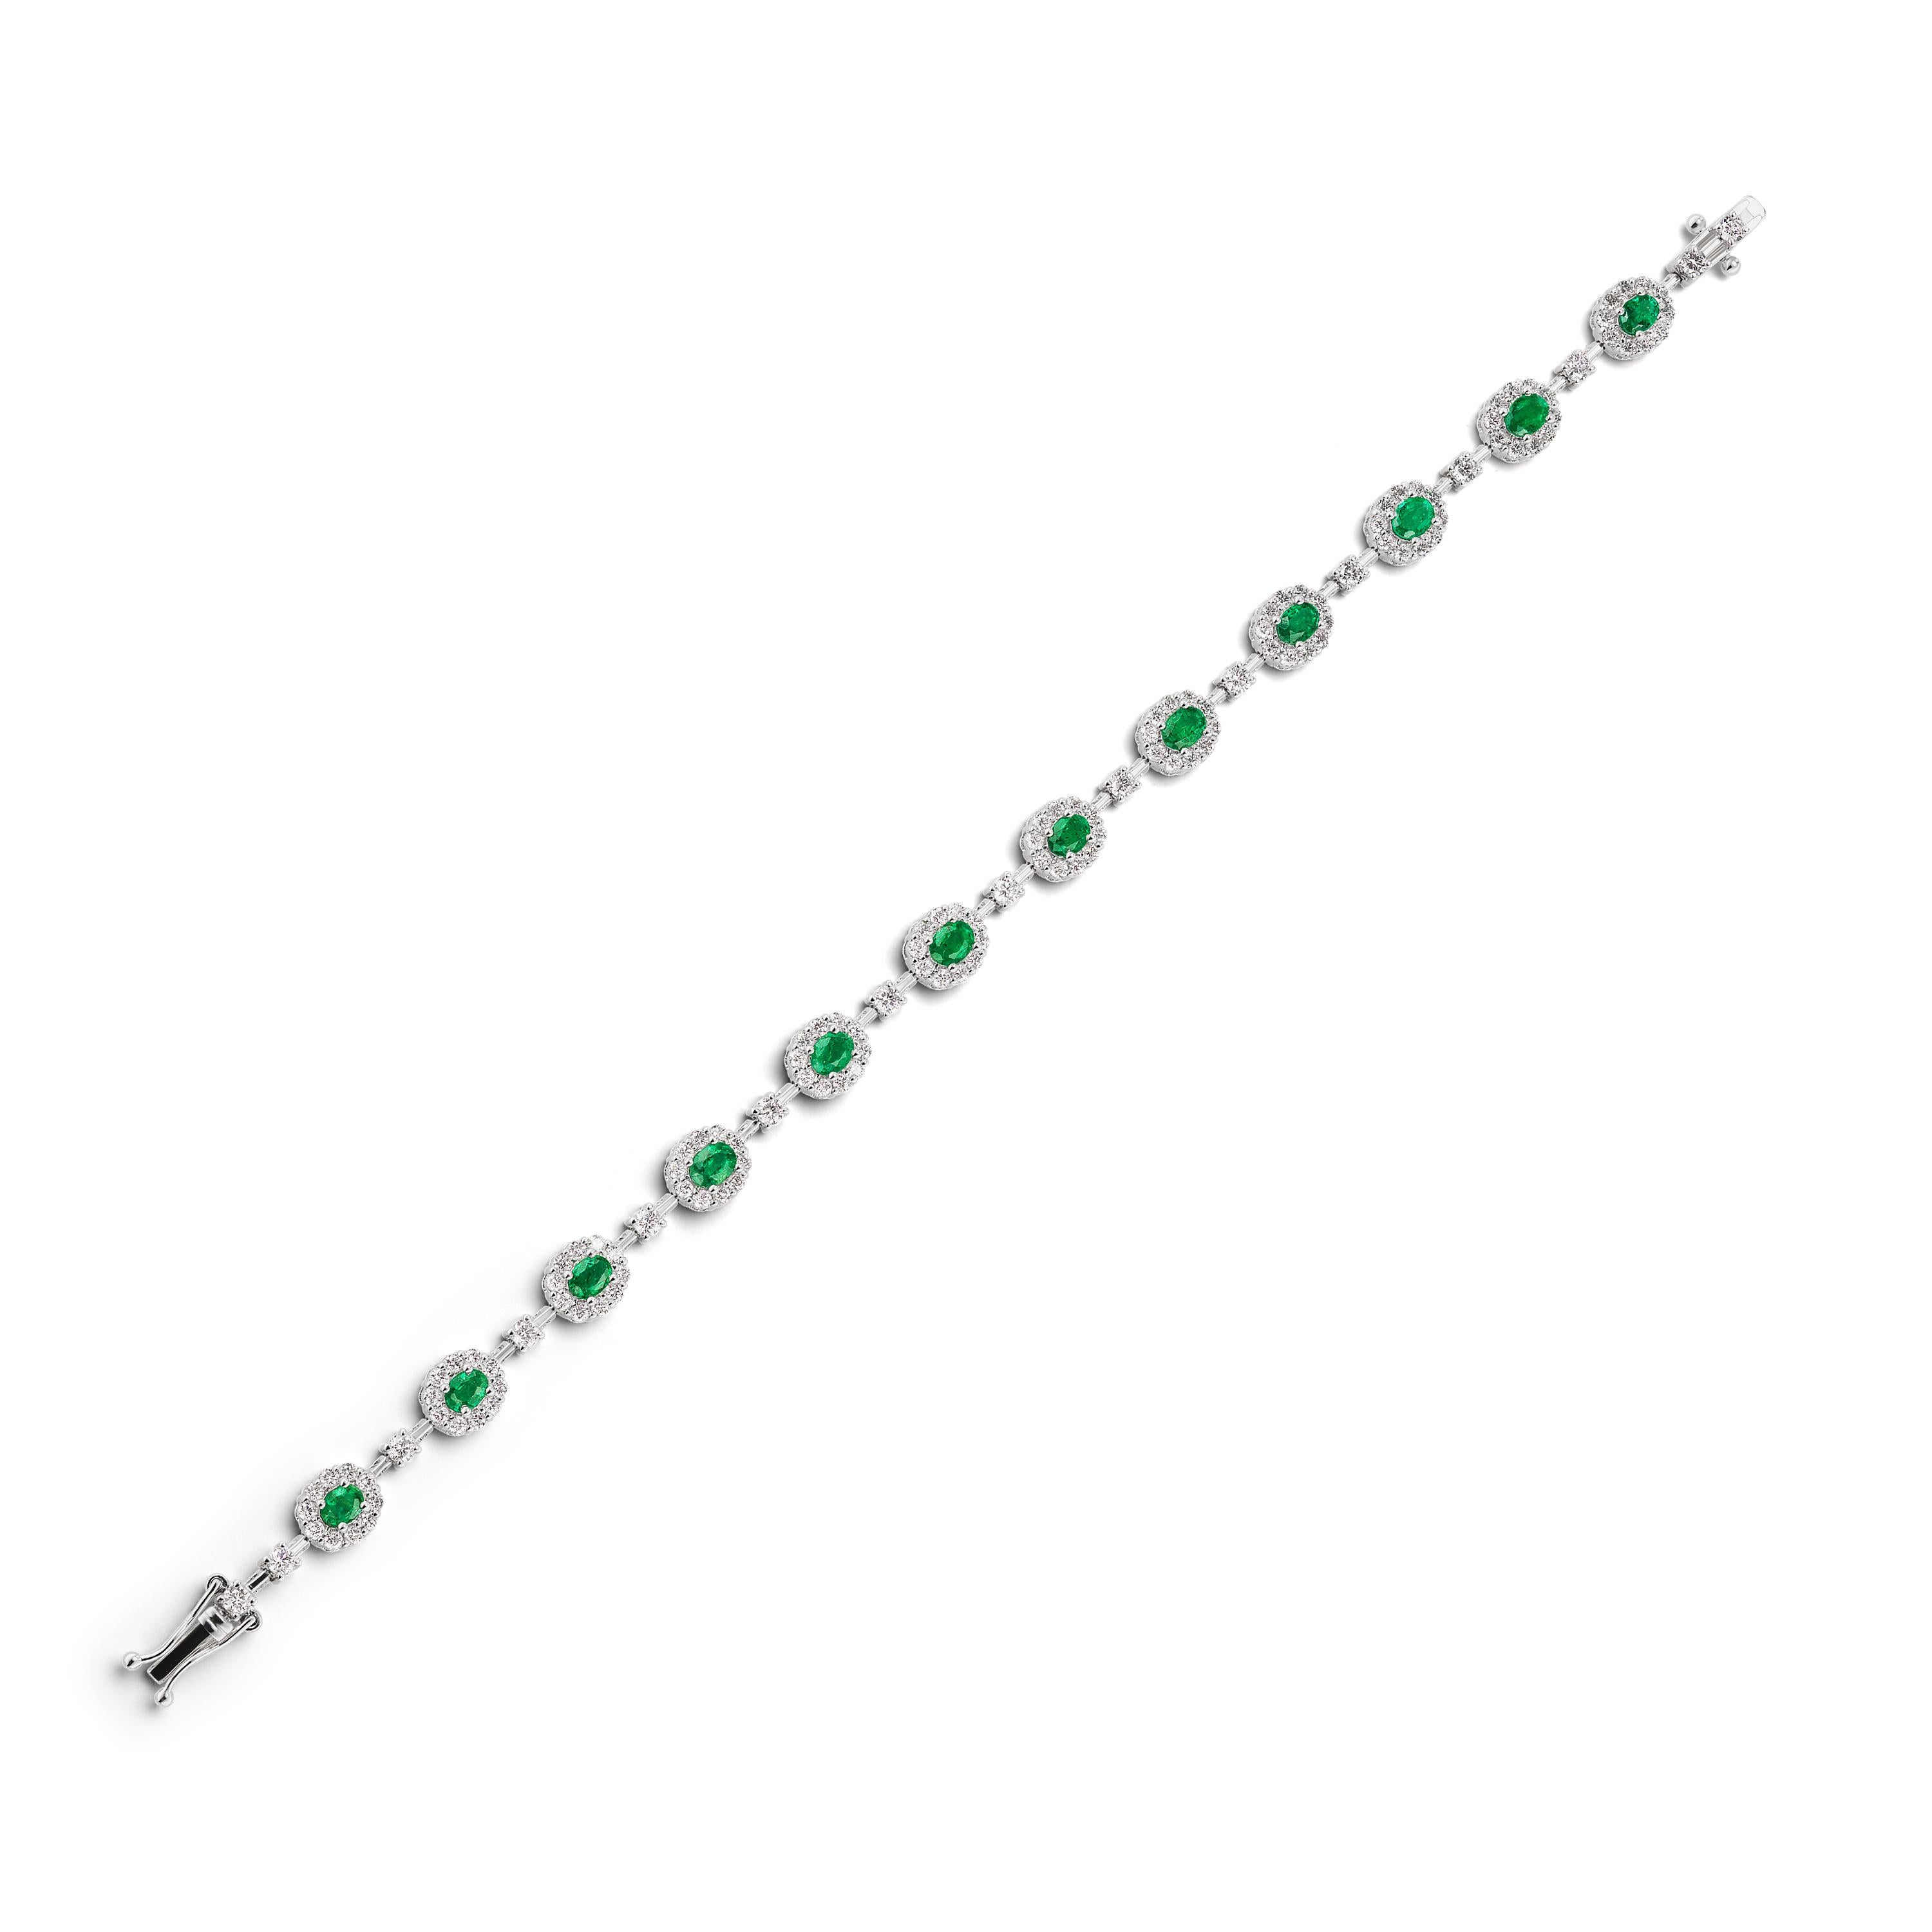 This stunning Emerald and Diamonds Tennis bracelet has a delicate air of femininity that is hard to miss. Crafted from 18K white gold, this remarkable bracelet showcases prong-set oval Emeralds sprinkled with glittering diamond accents and diamonds